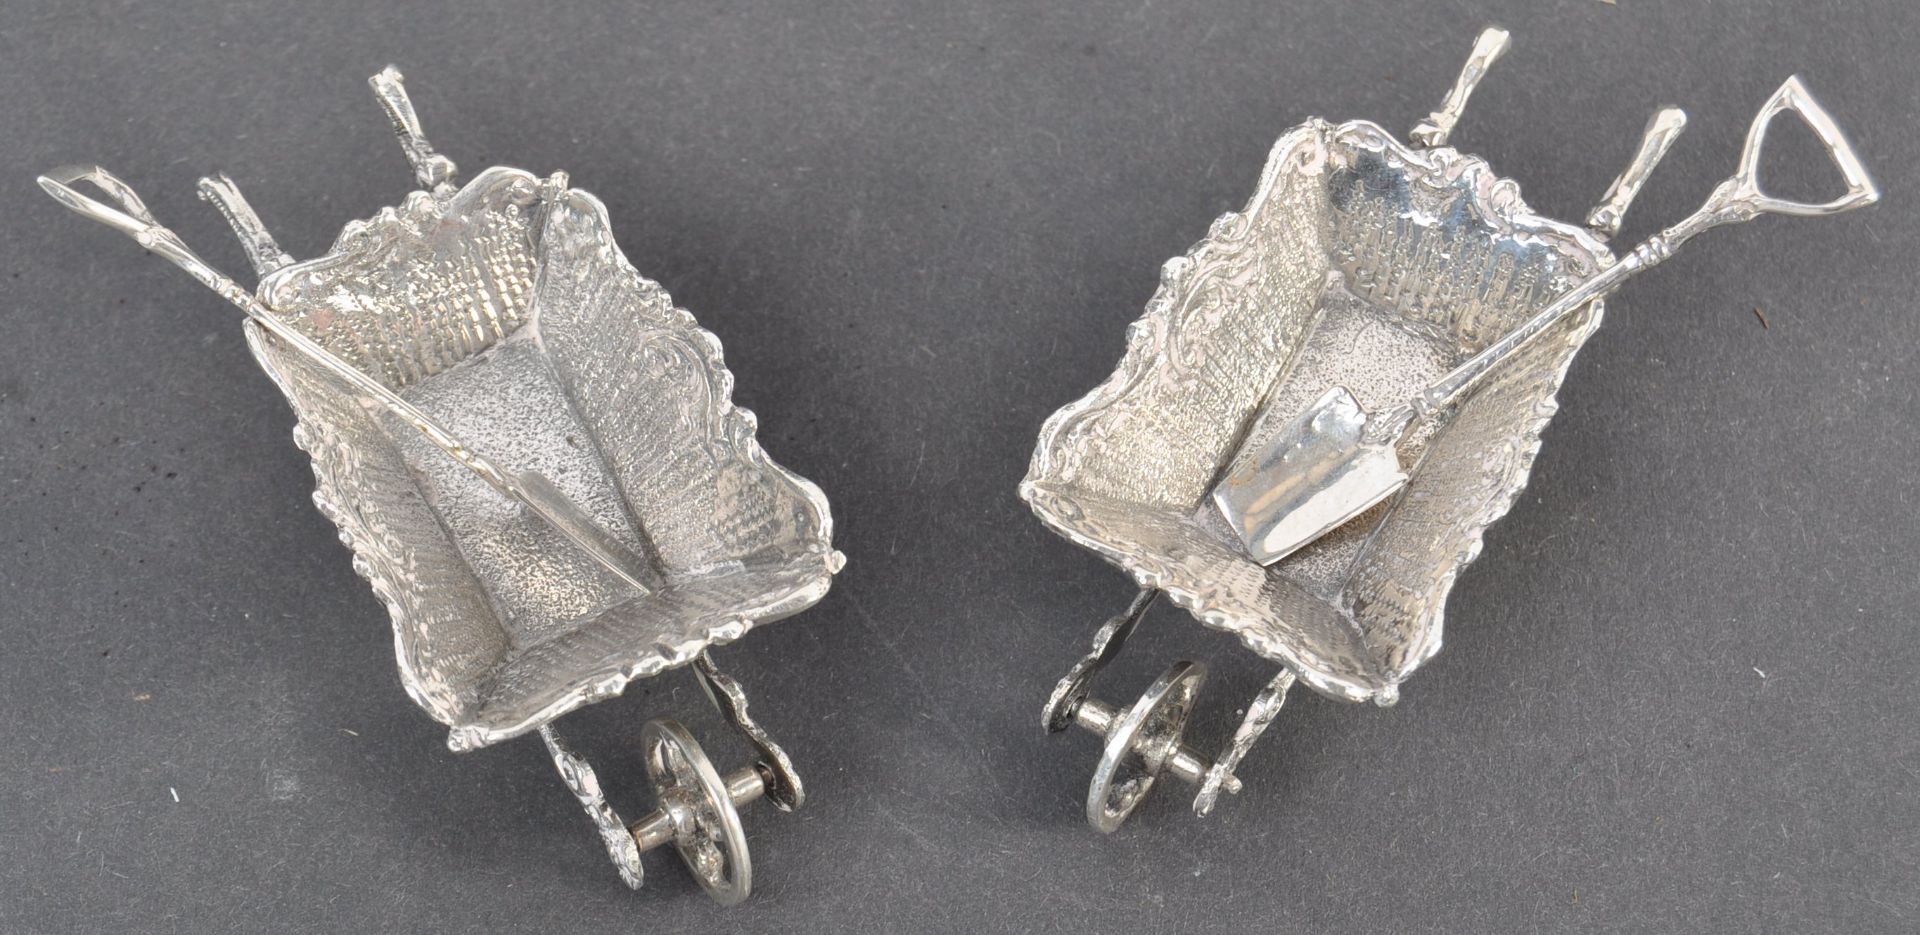 PAIR OF EDWARDIAN NOVELTY SILVER TABLE SALTS IN THE FORM OF WHEELBARROWS - Image 2 of 7